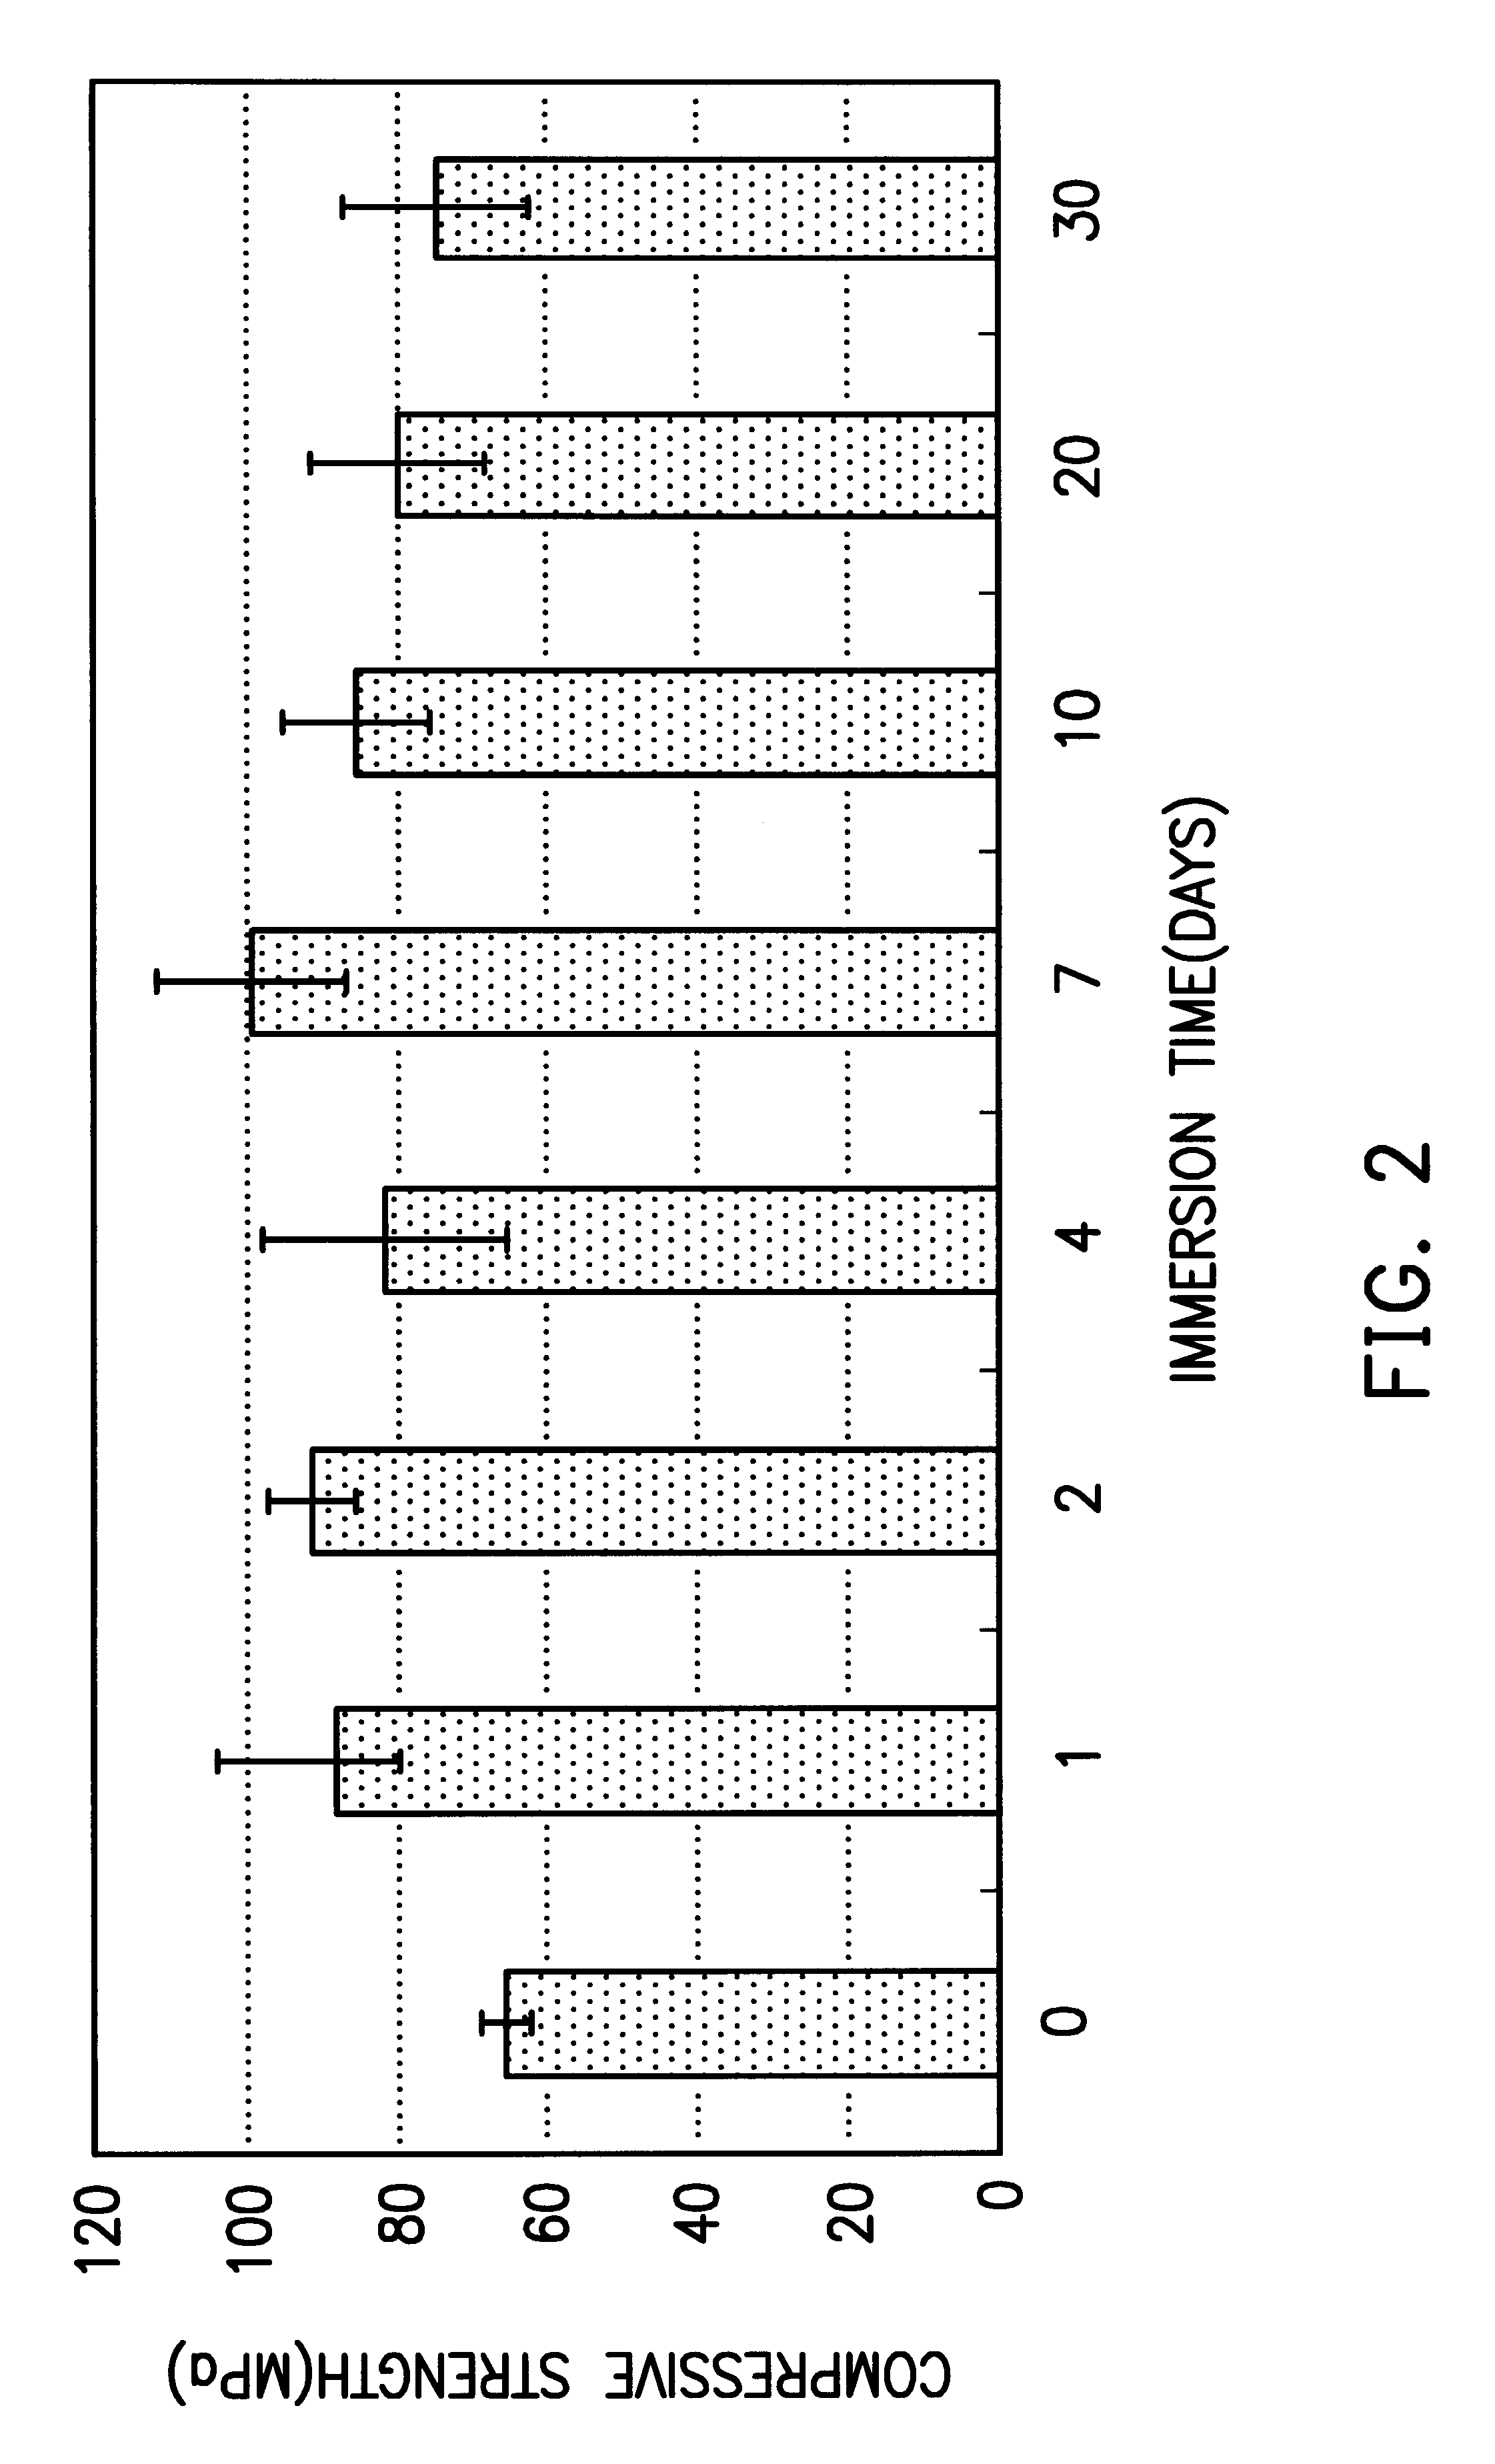 Process for producing fast-setting, bioresorbable calcium phosphate cements